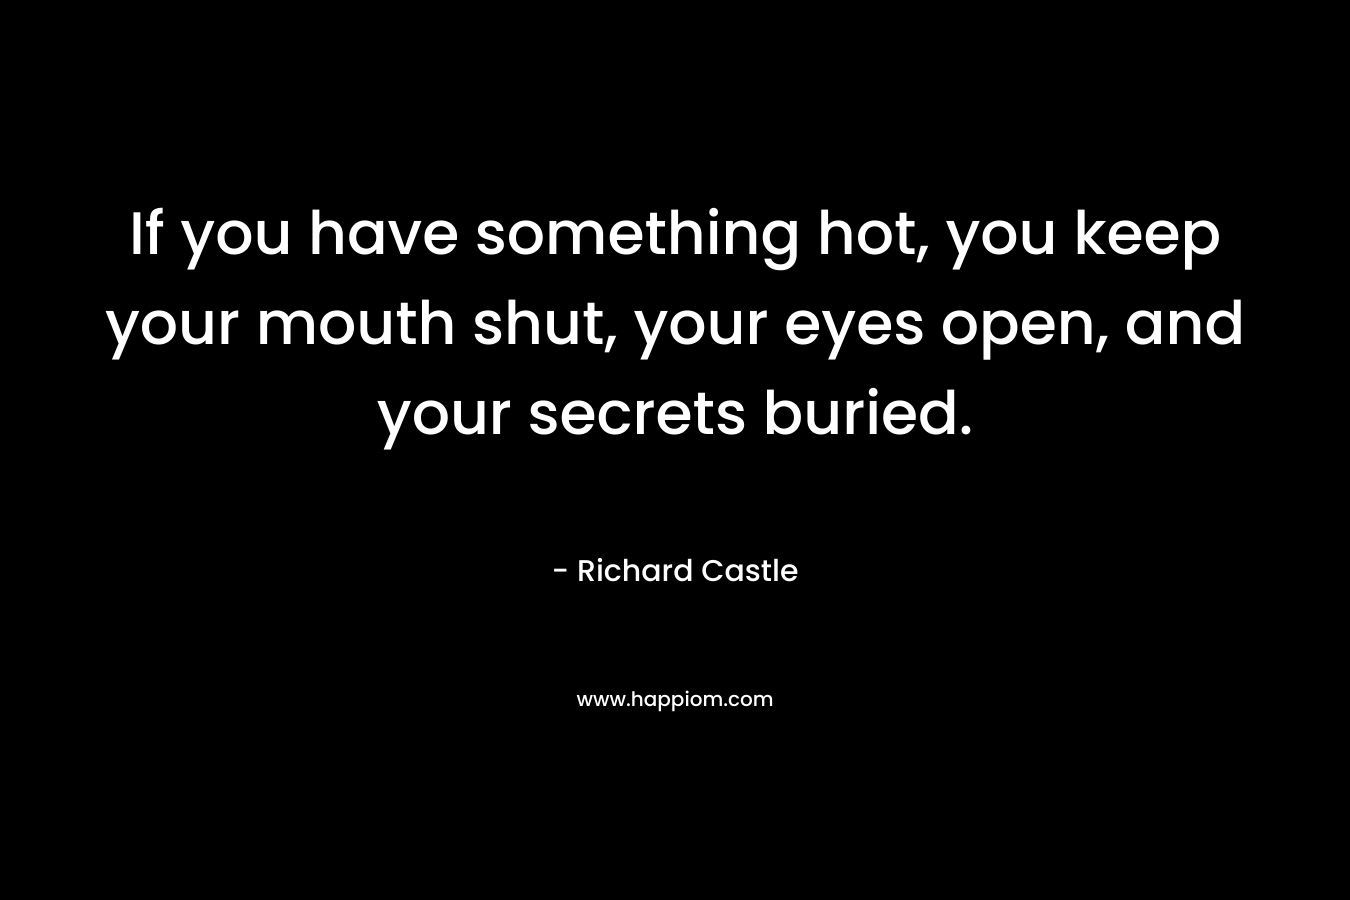 If you have something hot, you keep your mouth shut, your eyes open, and your secrets buried.